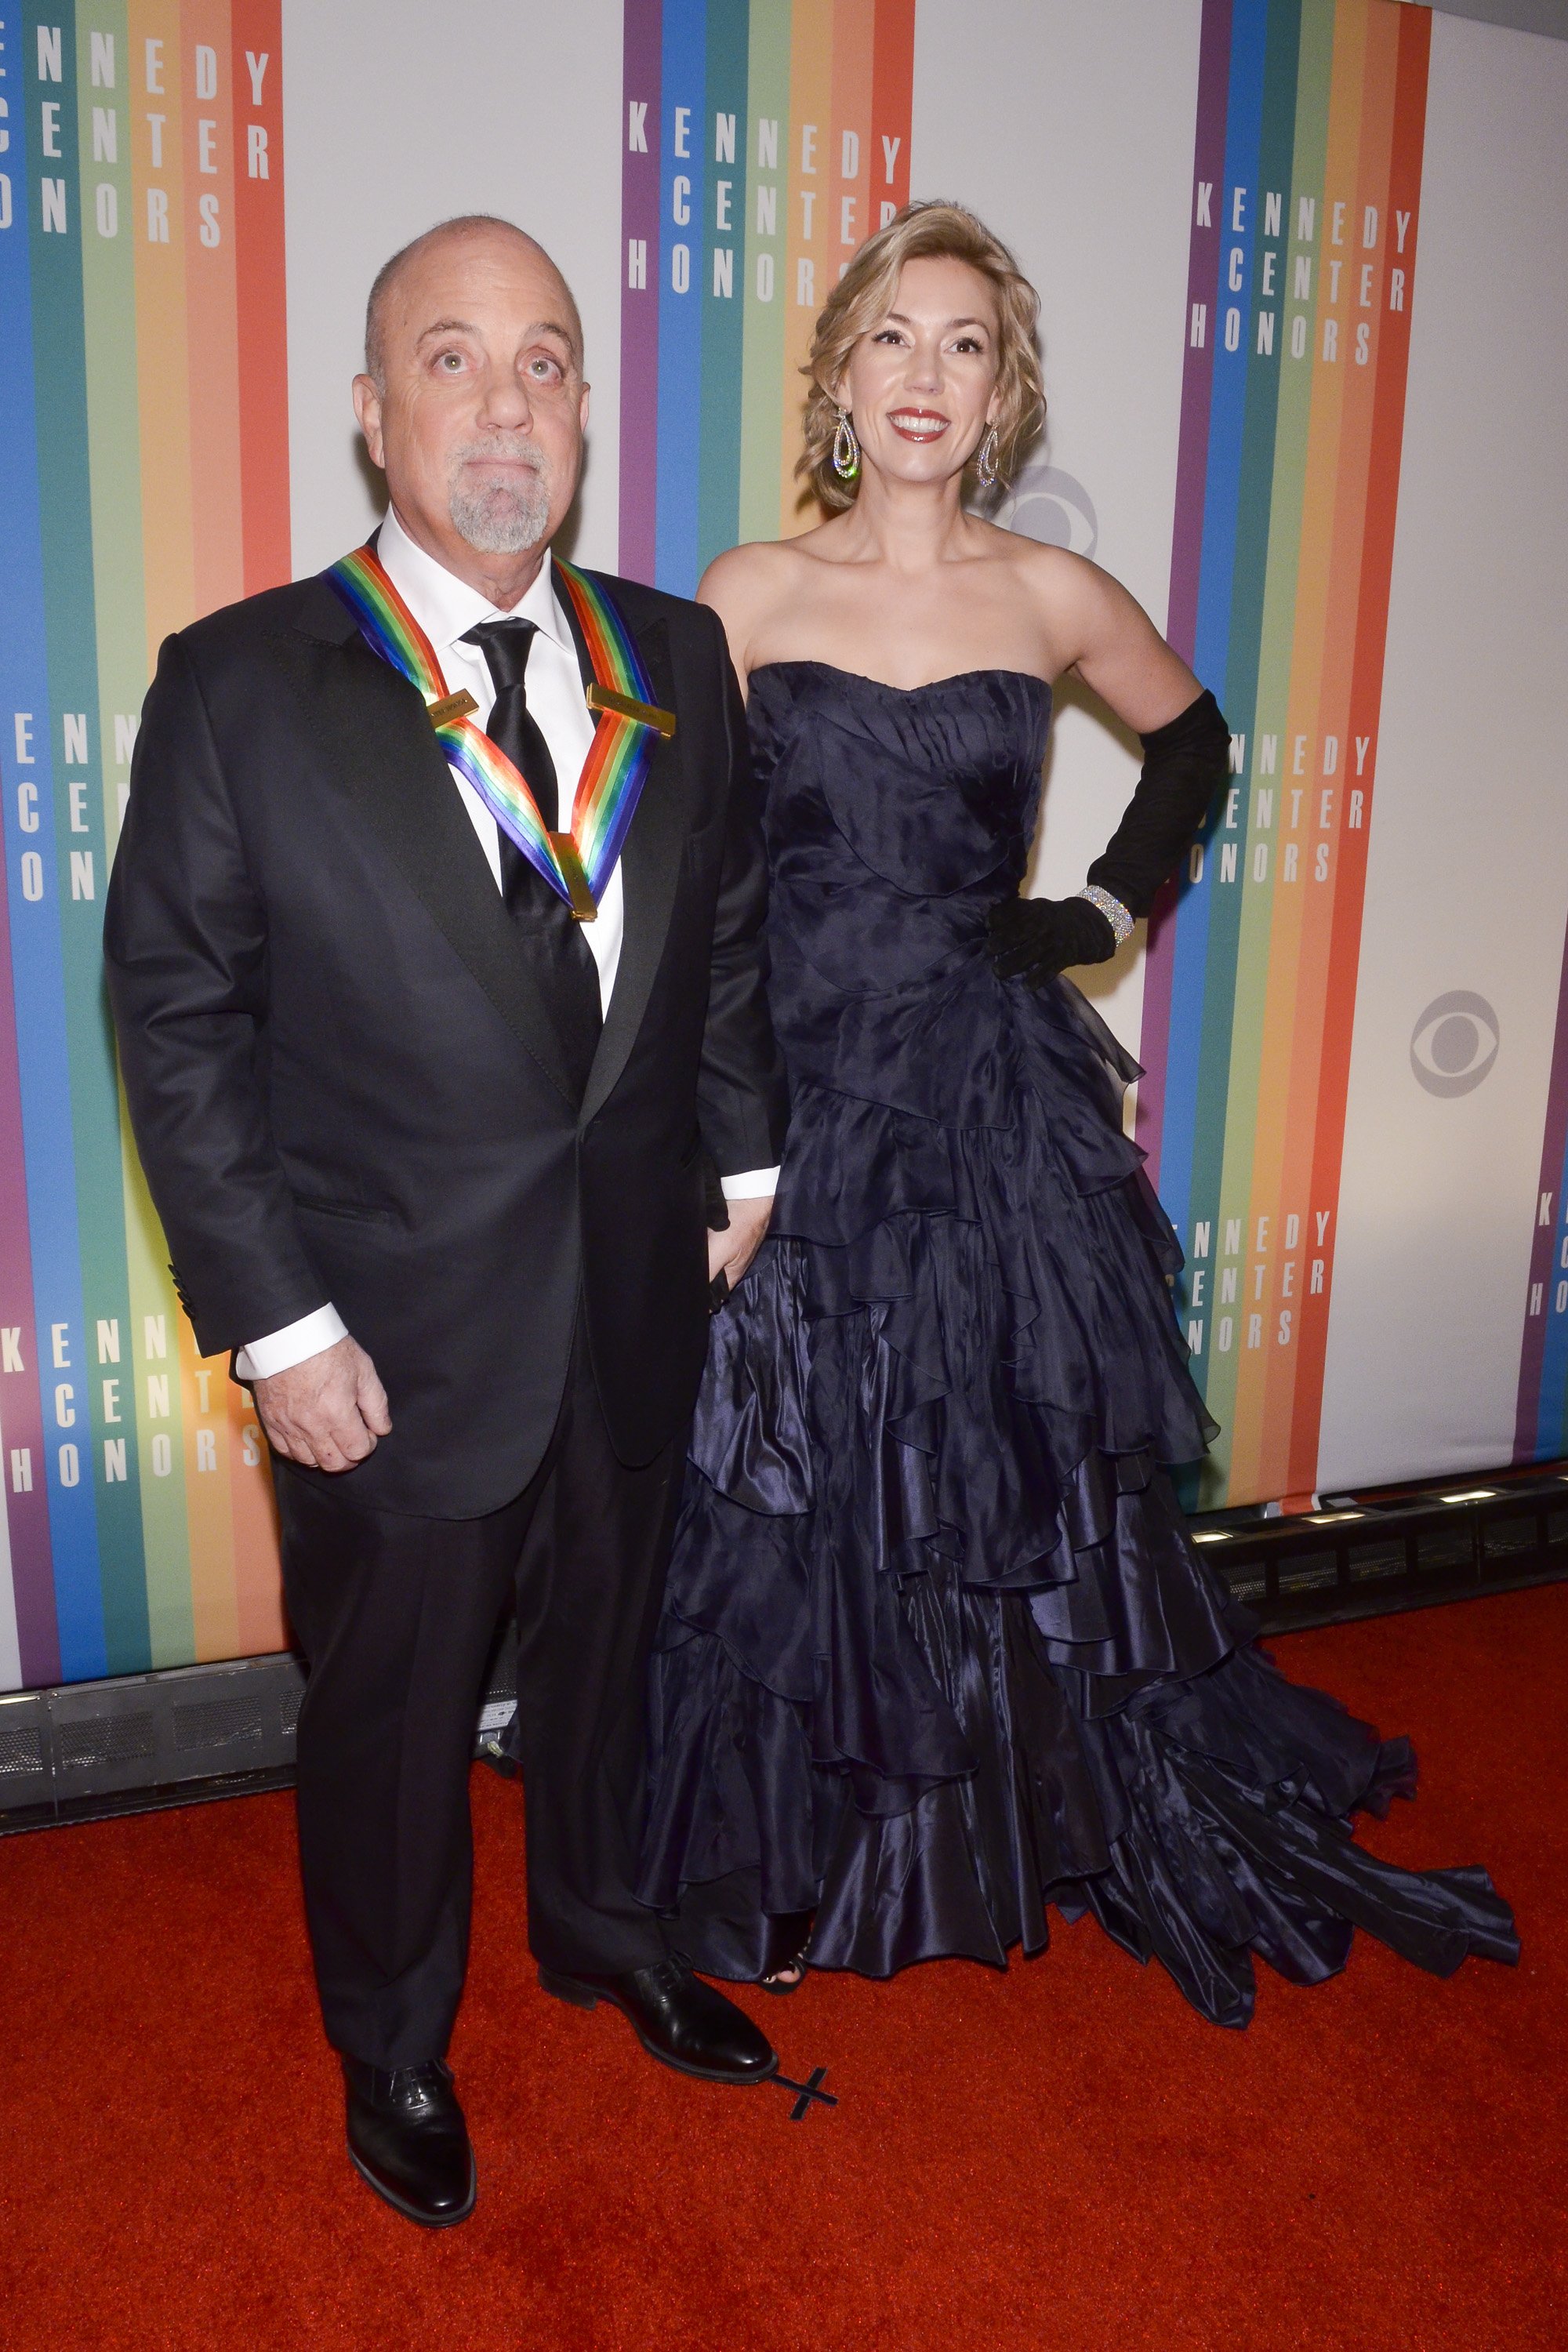 Billy Joel and Alexis Roderick at The 36th Kennedy Center Honors Gala on December 8, 2013, in Washington, DC. | Source: Getty Images